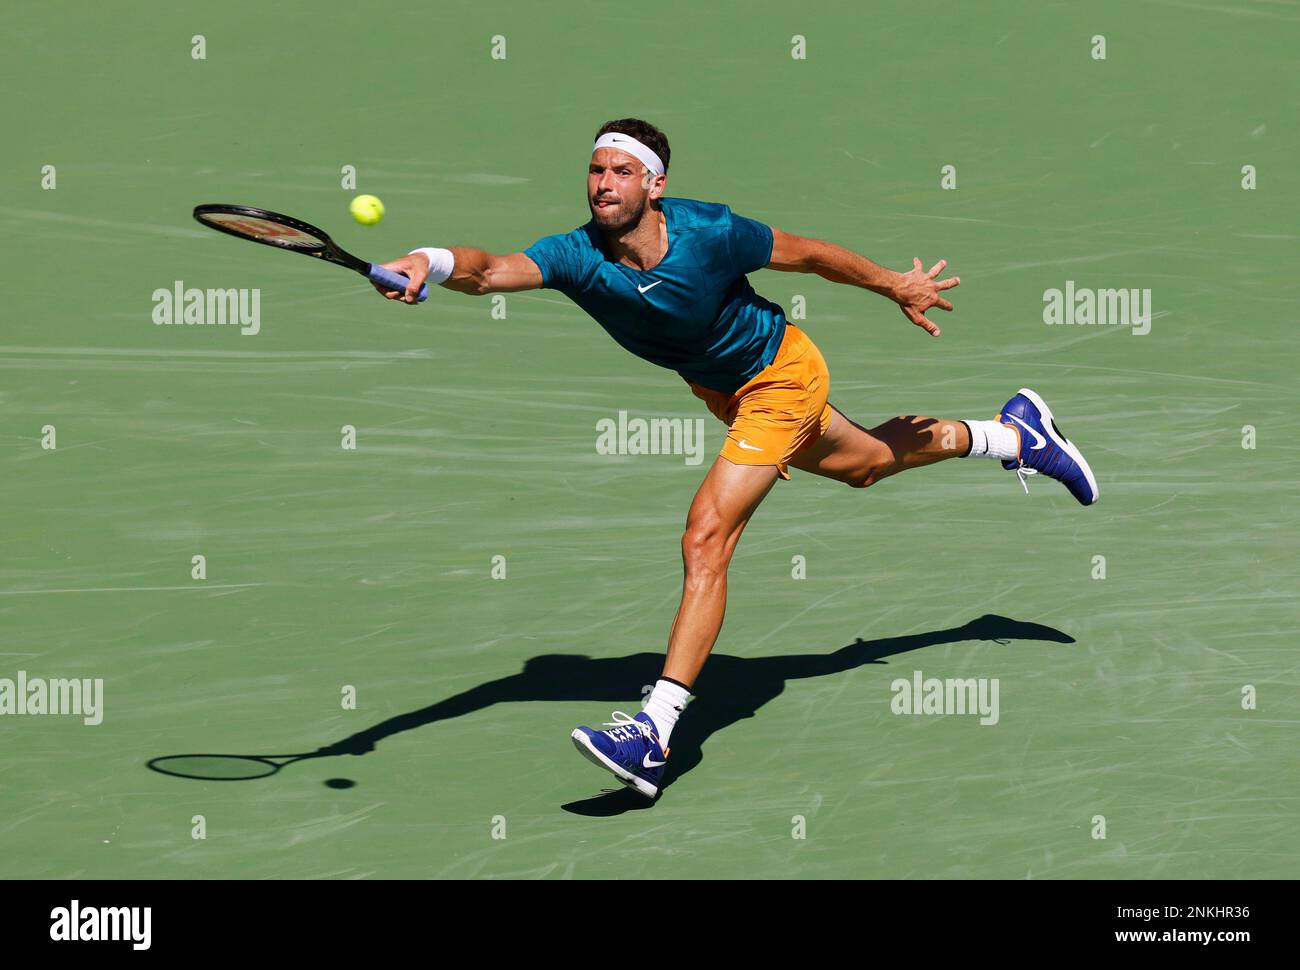 March 18, 2022 Grigor Dimitrov of Bulgaria returns a shot against Andrey Rublev of Russia in their quarterfinal match of the 2022 BNP Paribas Open at Indian Wells Tennis Garden in Indian